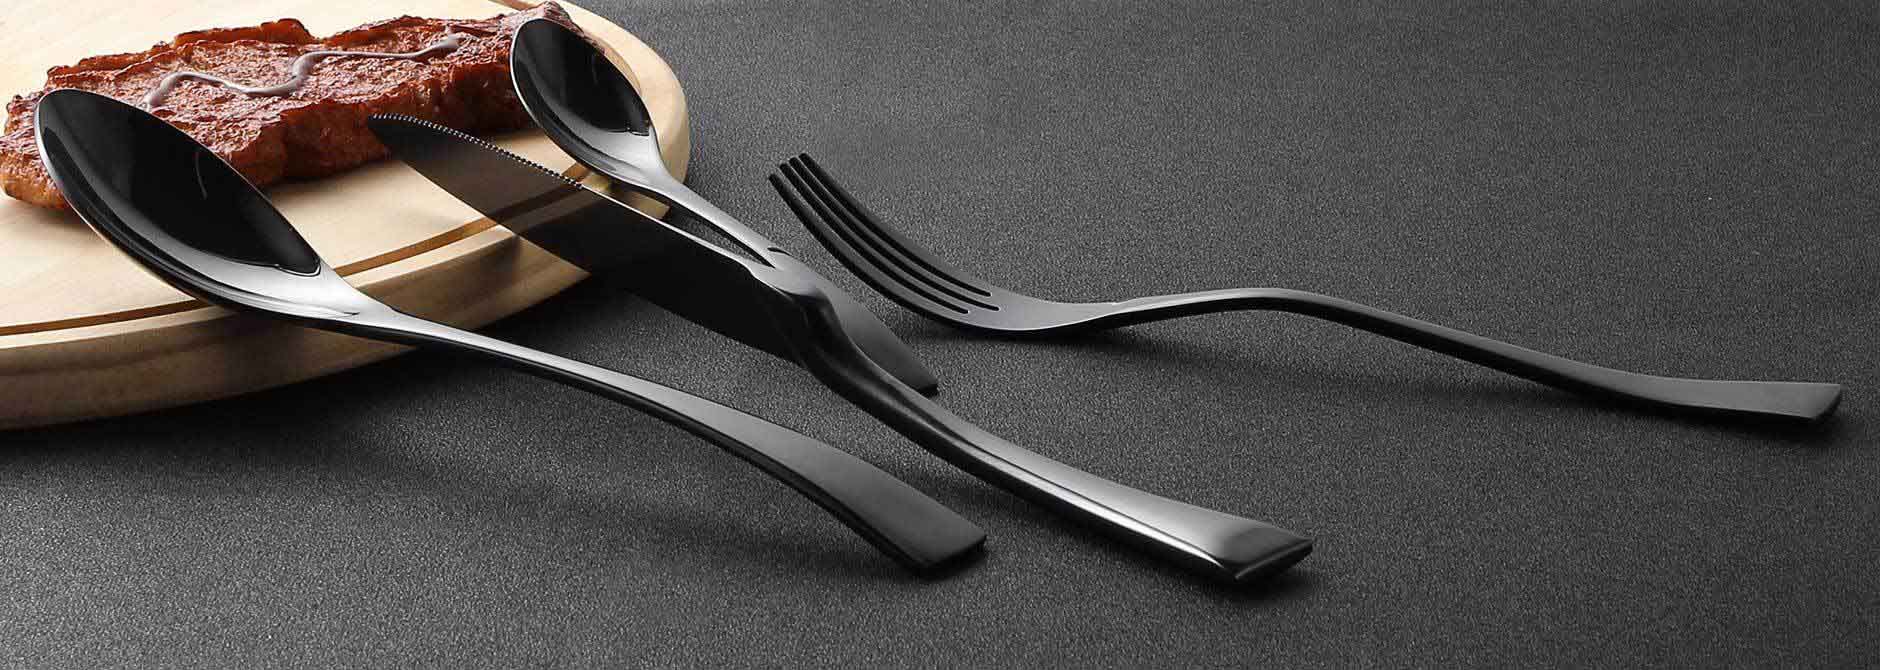 High Quality Stainless Steel Flatware